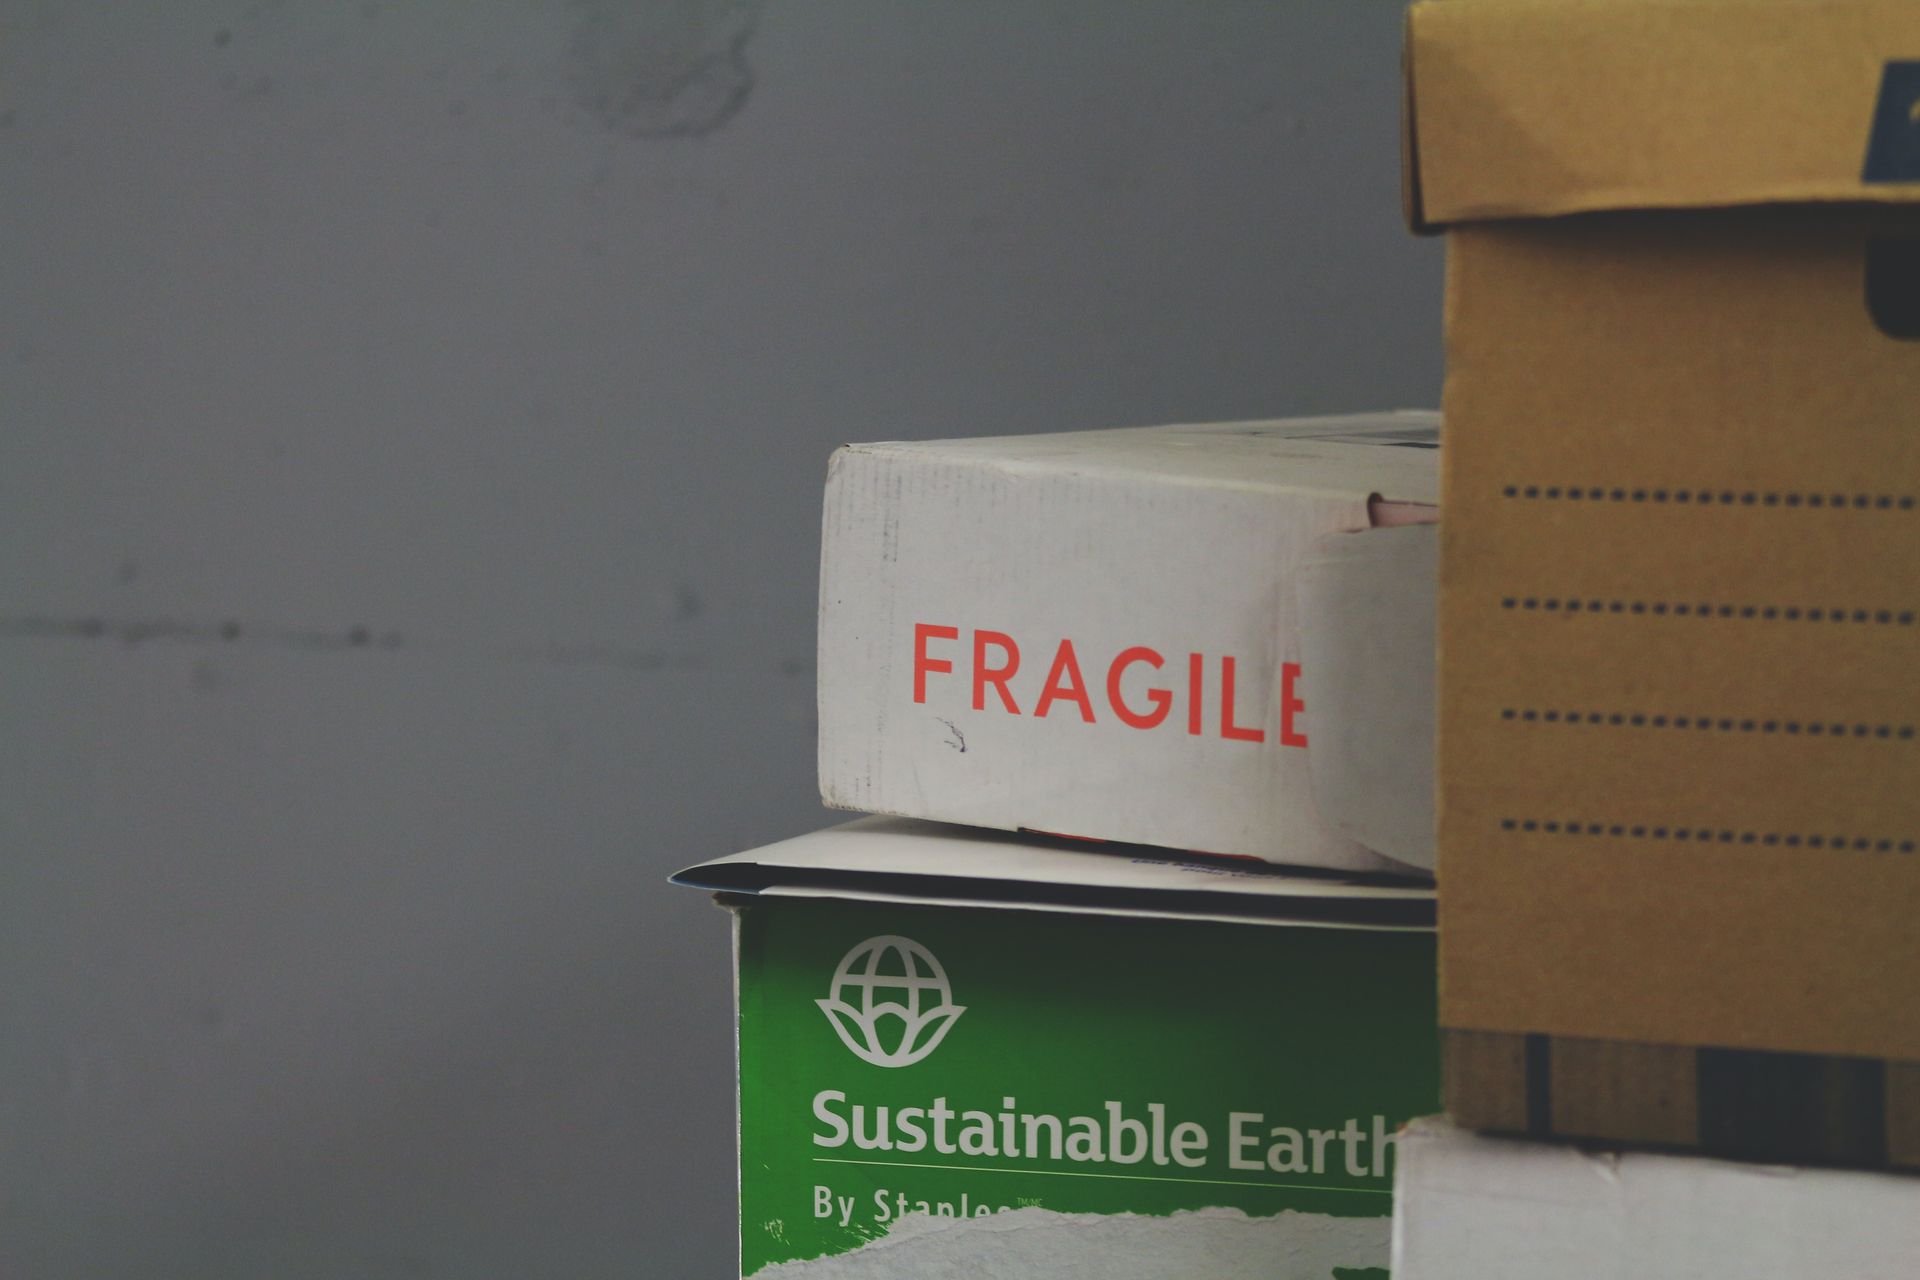 Stack of cardboard boxes for moving, one box prominently labeled as fragile.